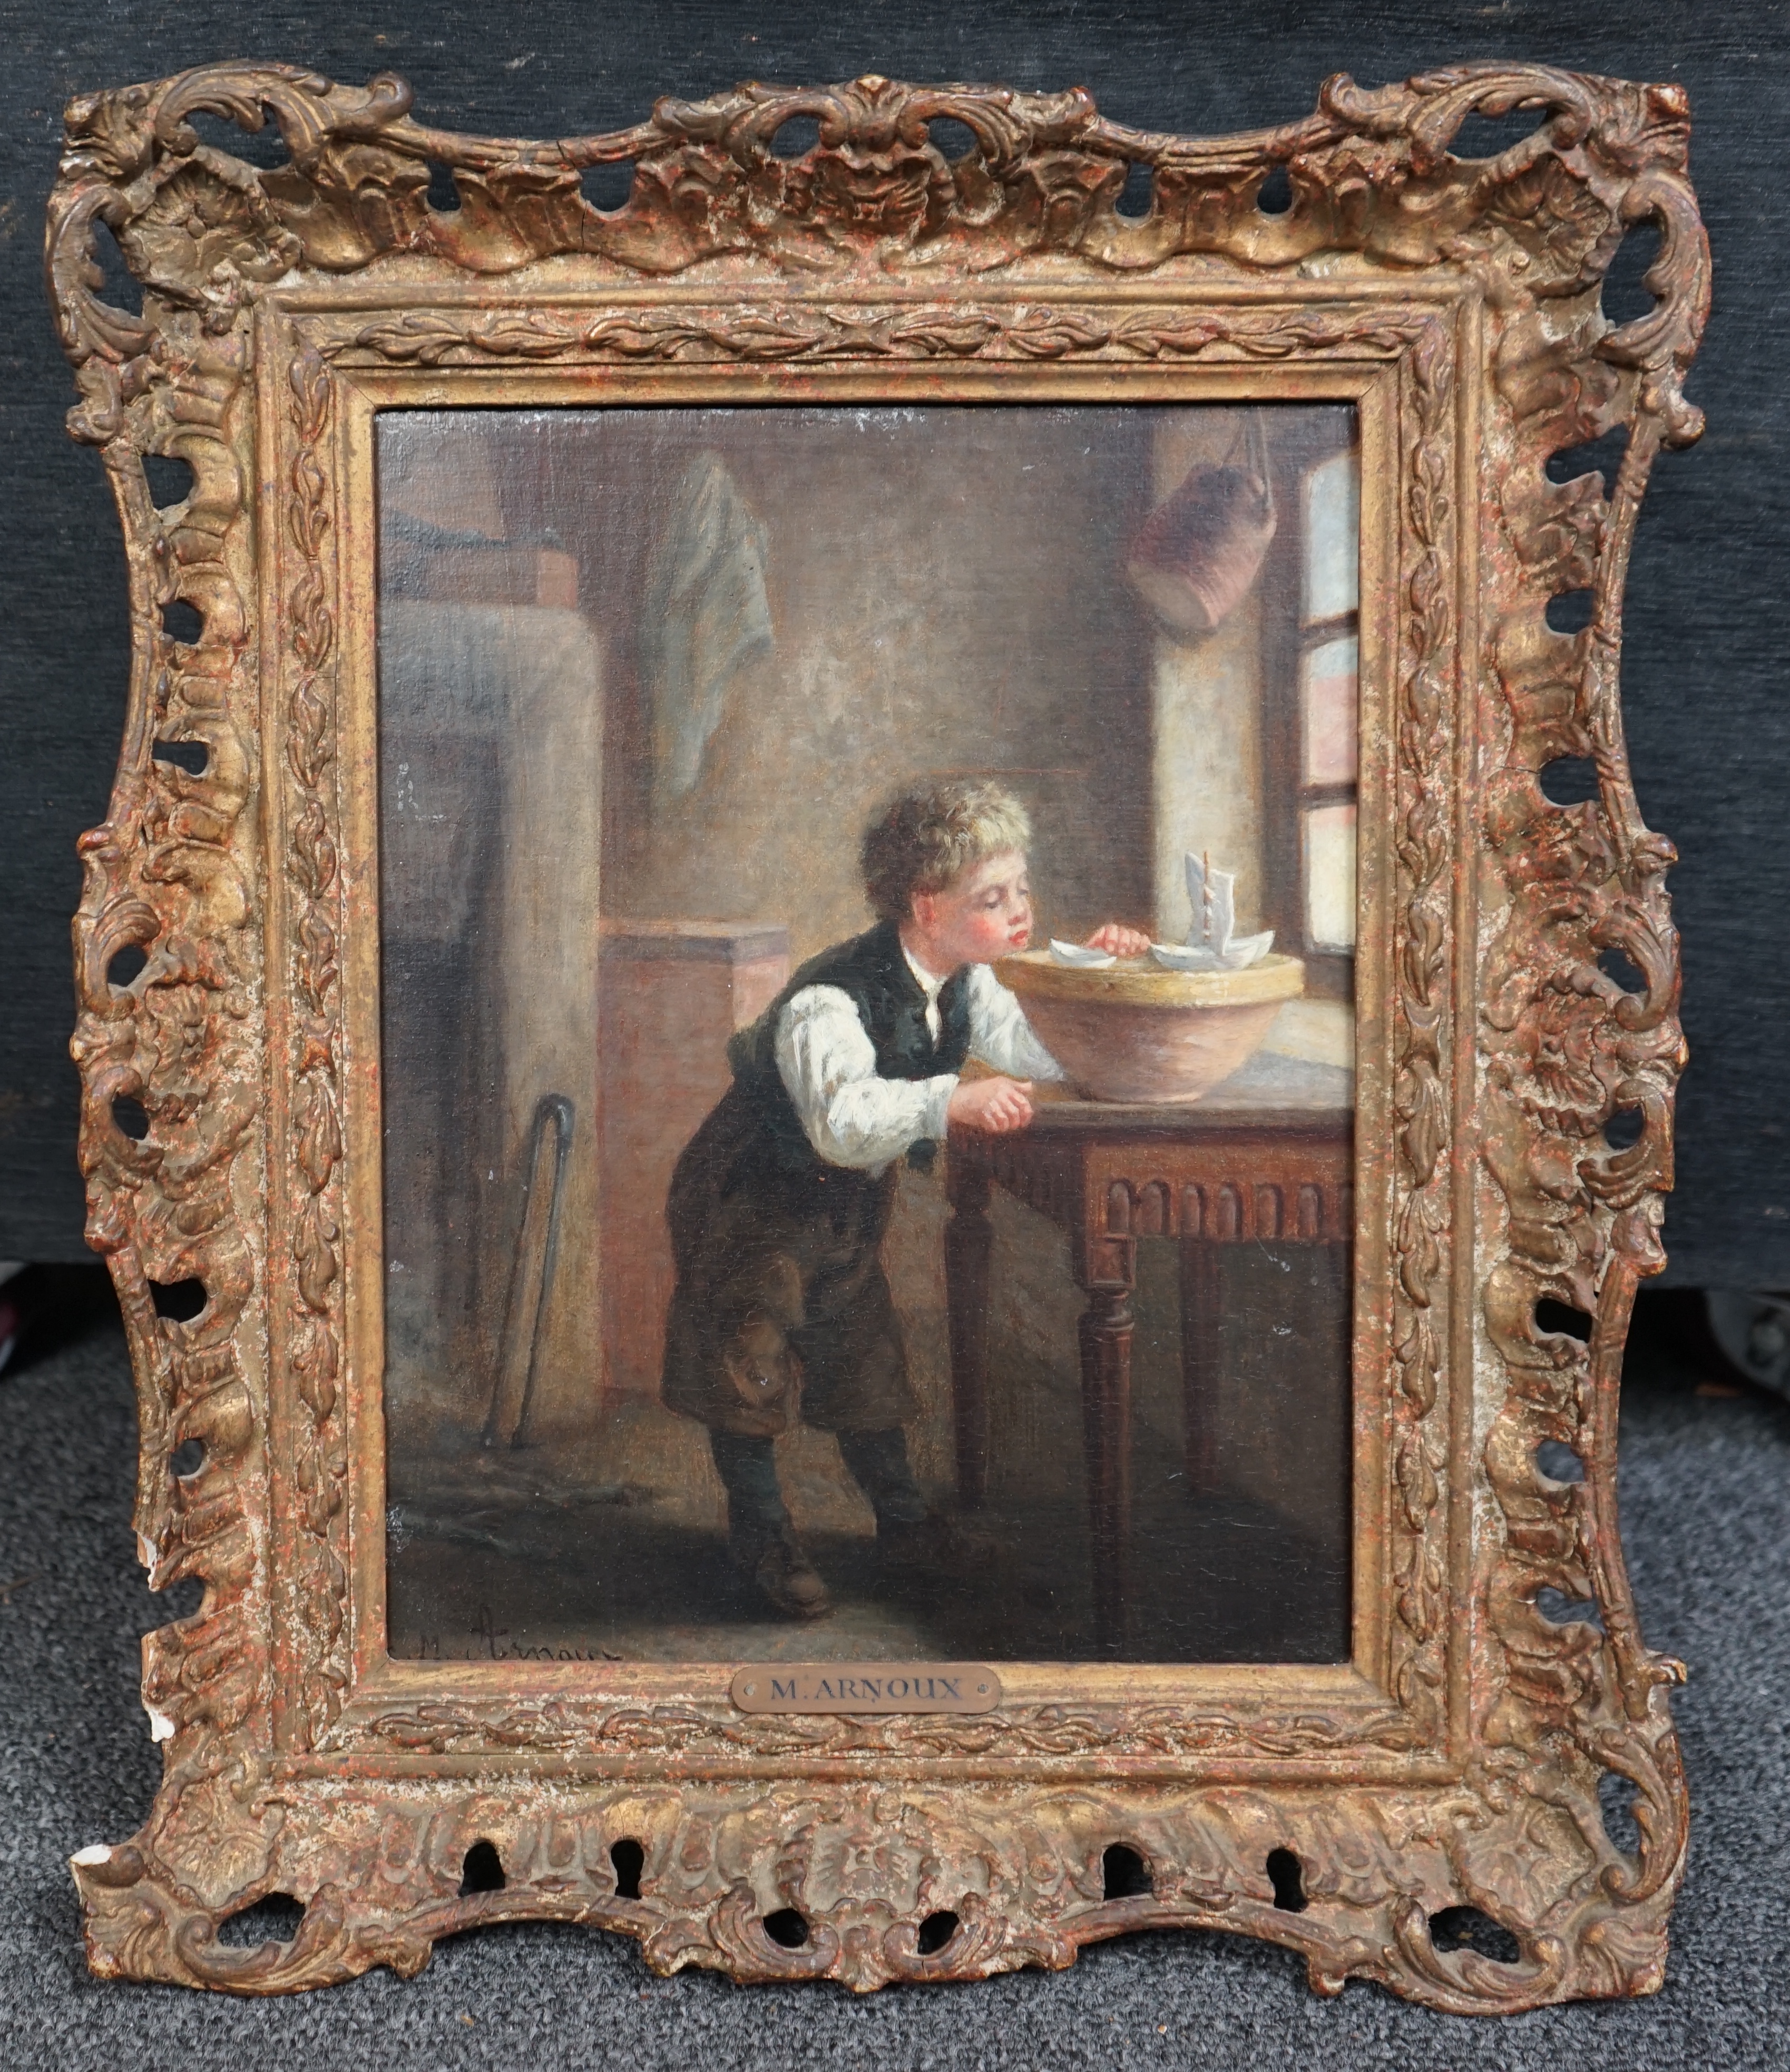 Michel Arnoux (French, 1833-1877), oil on mahogany panel, Interior with boy playing with model sailing boats, signed, 24 x 18cm. Condition - fair to good